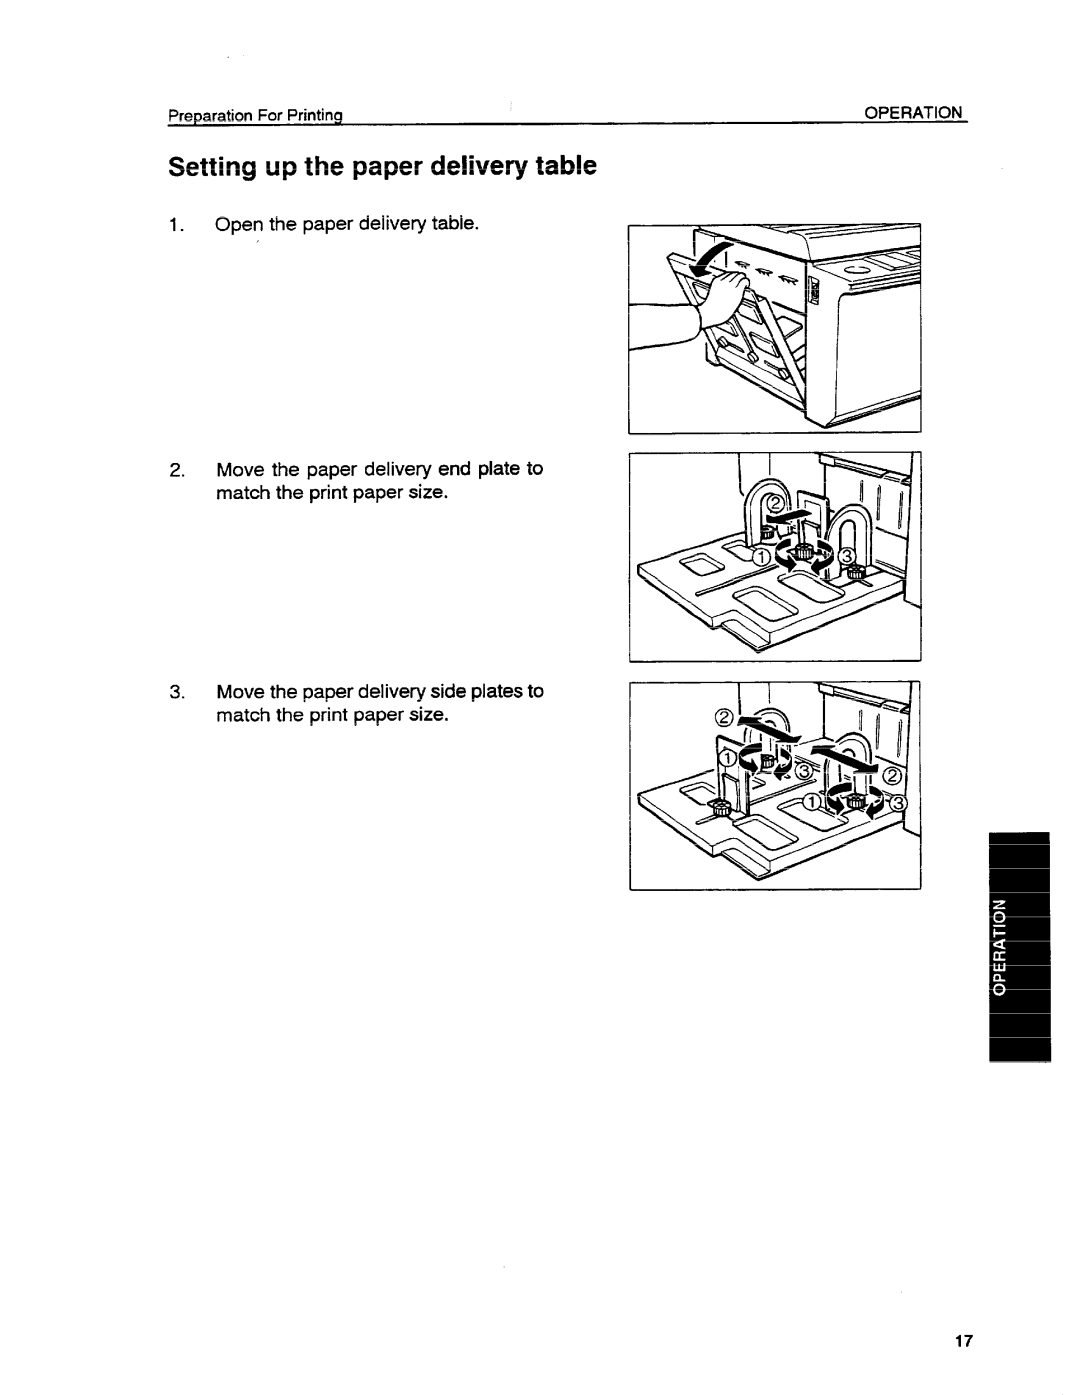 Ricoh VT1730 manual Setting up the paper delivery table, Open the paper delivery table, Preparation For Printing, Operation 